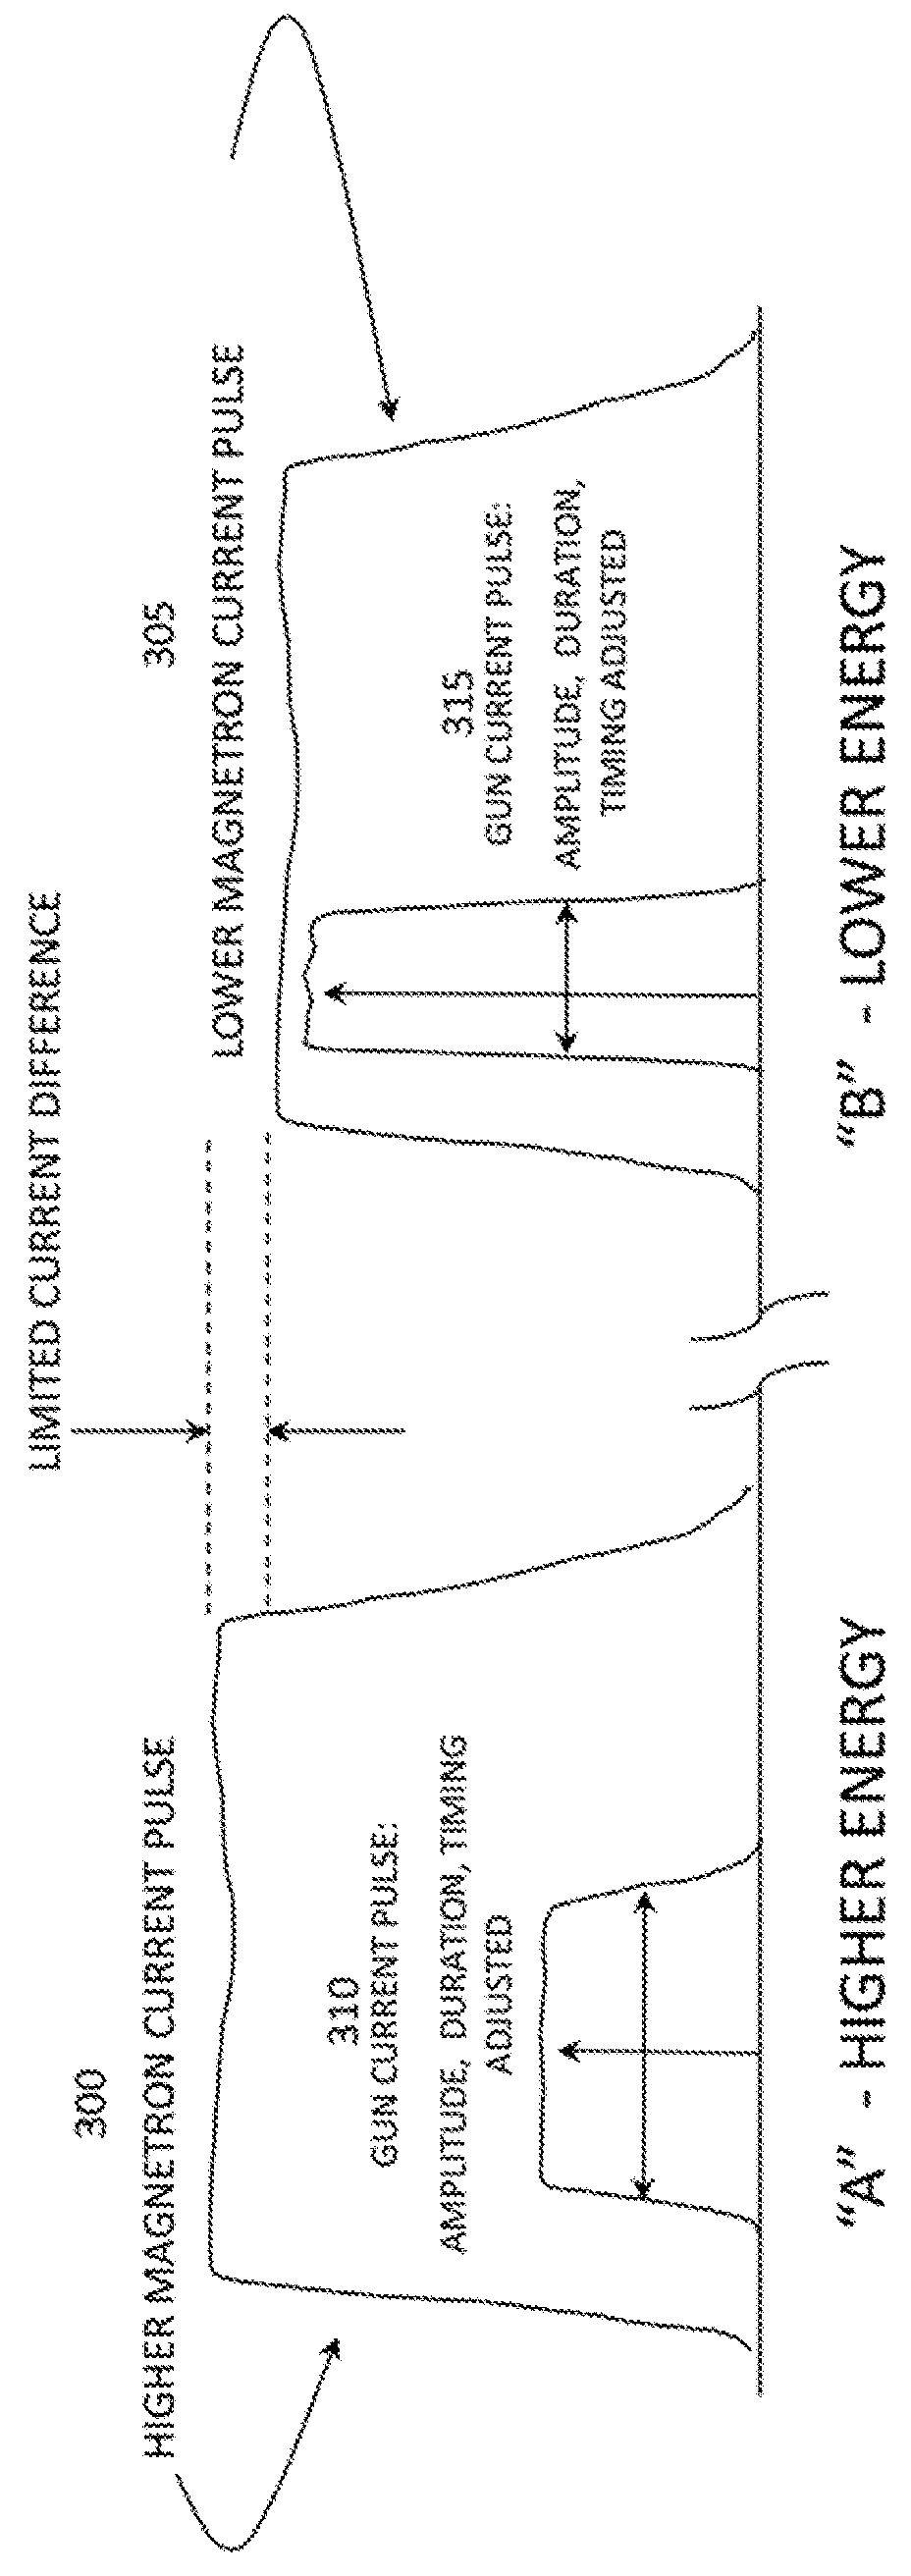 Linear accelerator system for stable pulsing at multiple  dose levels